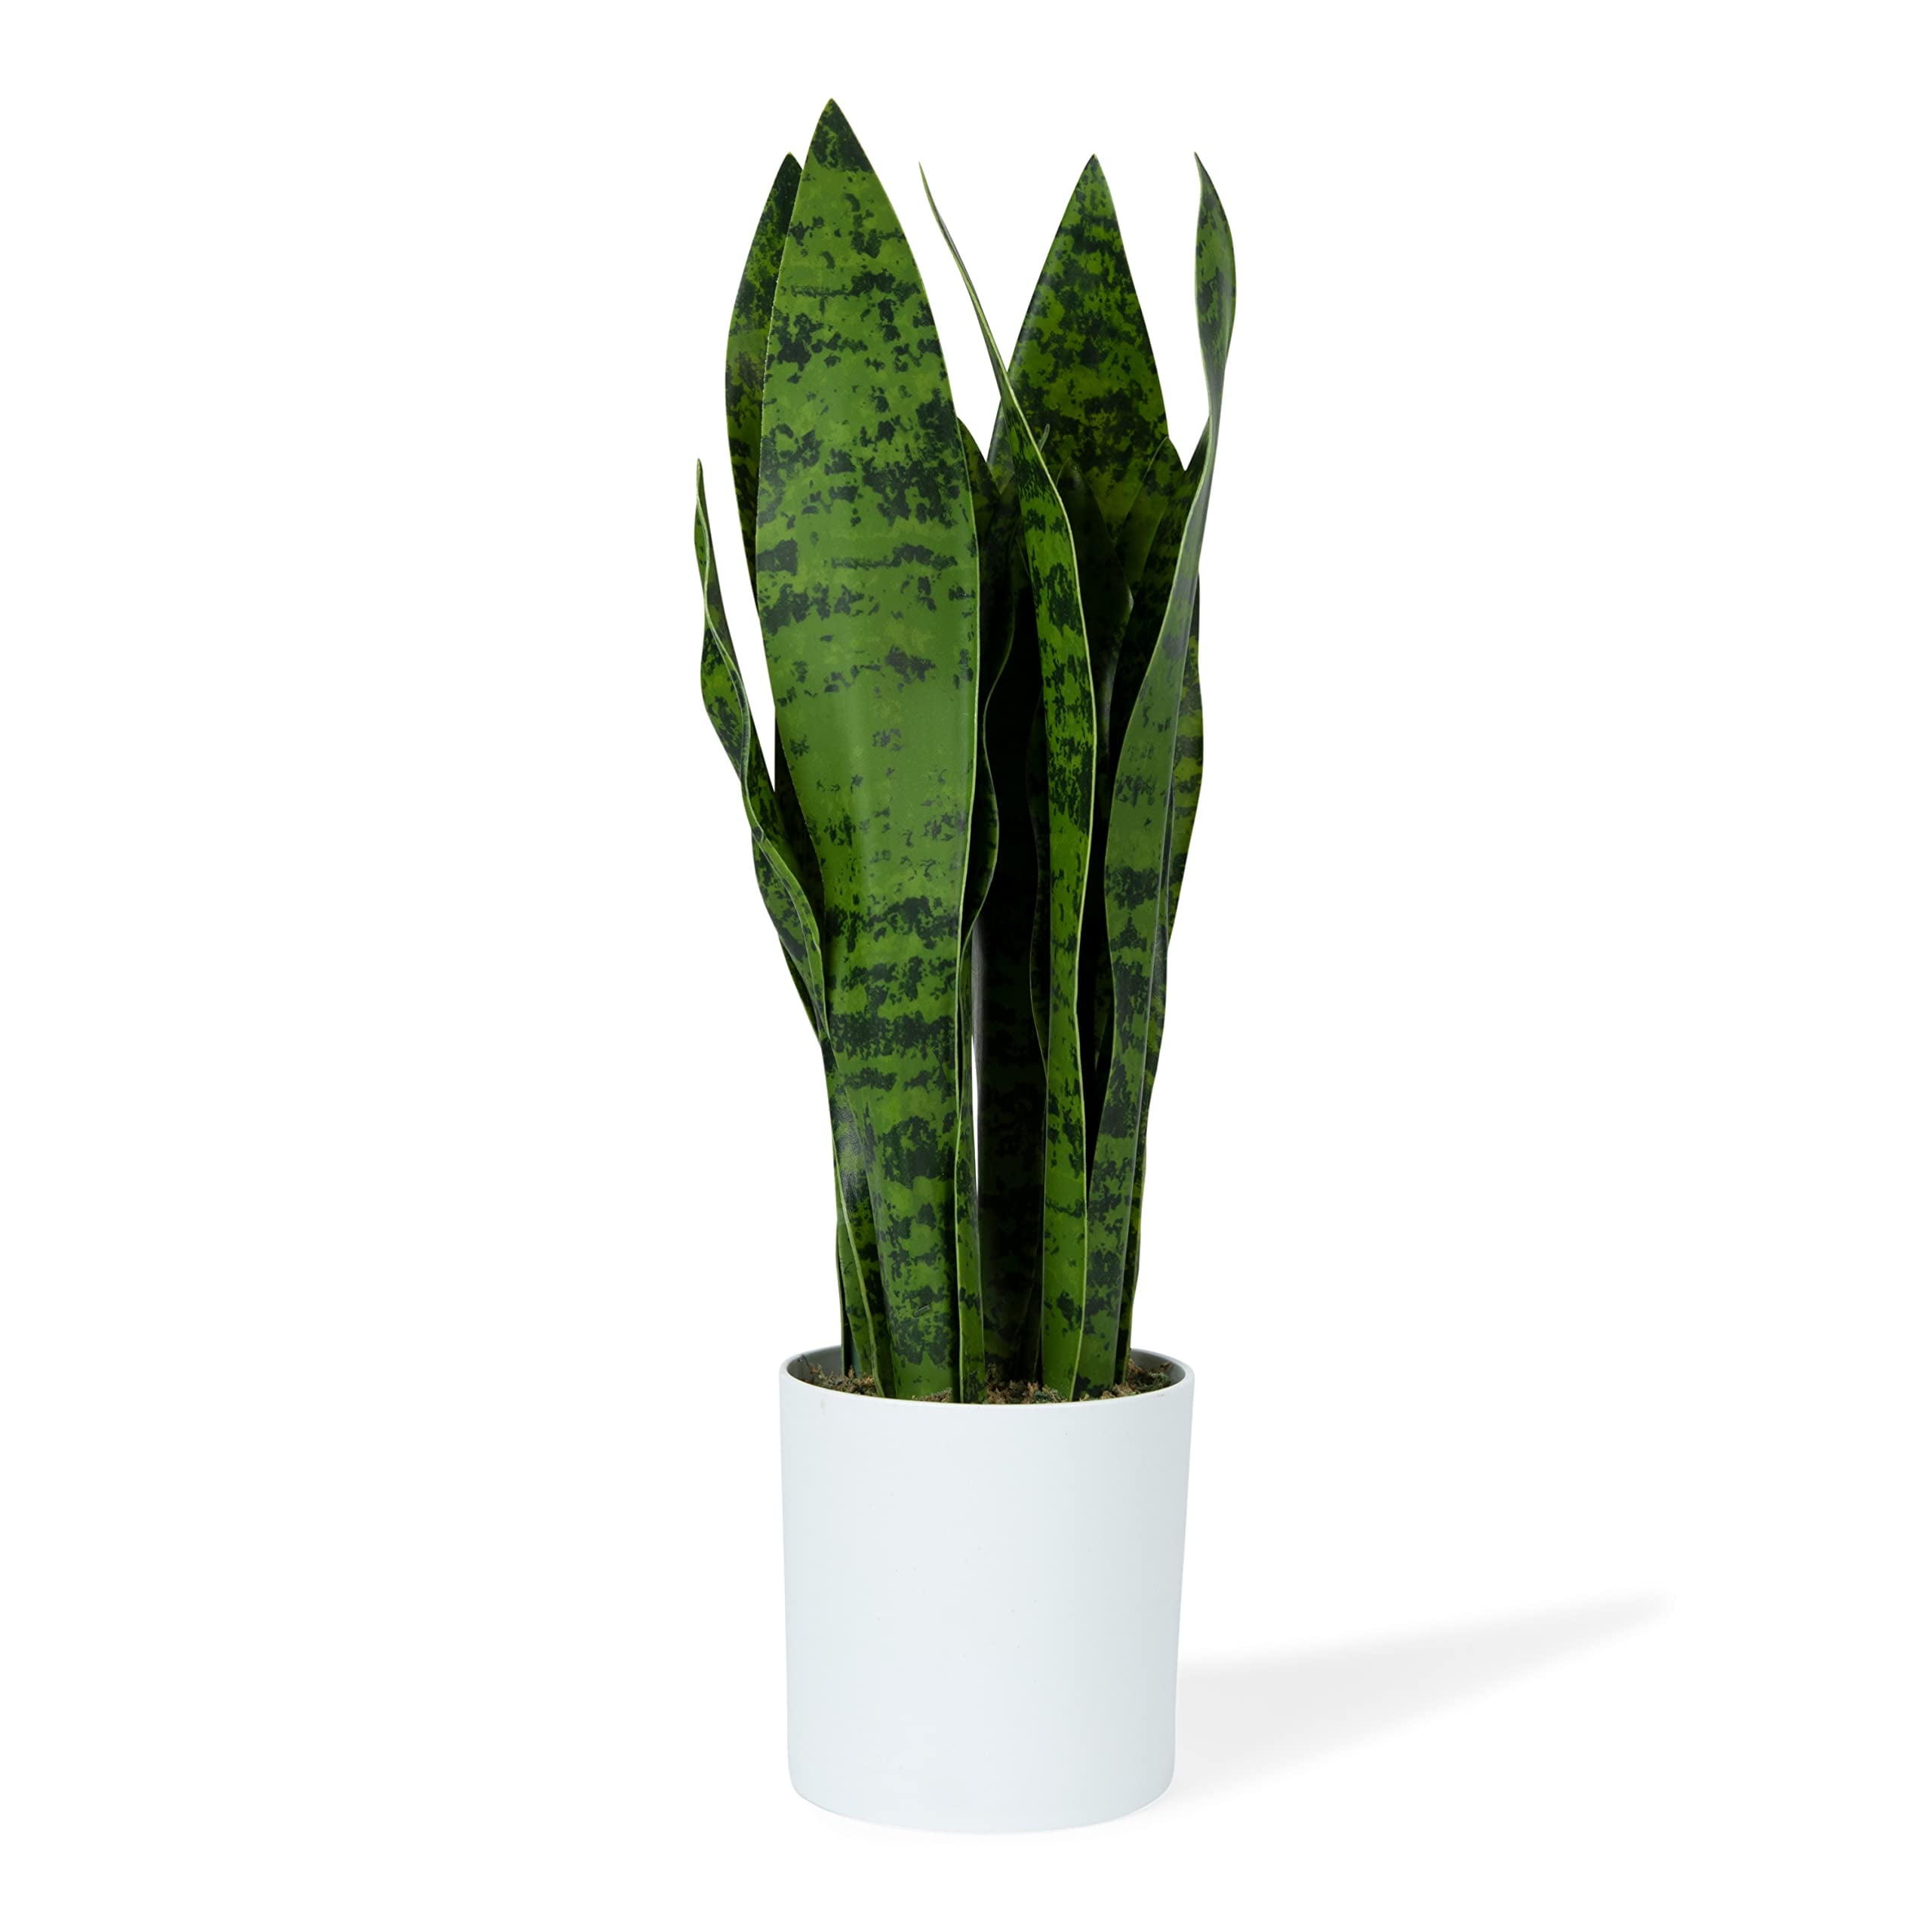 Flybold Faux Snake Plant - Large Indoor Floor Plant with 7 Tall Leaves and  Durable Pot - Artificial Mother in Law Tongue Plant for Modern Decor